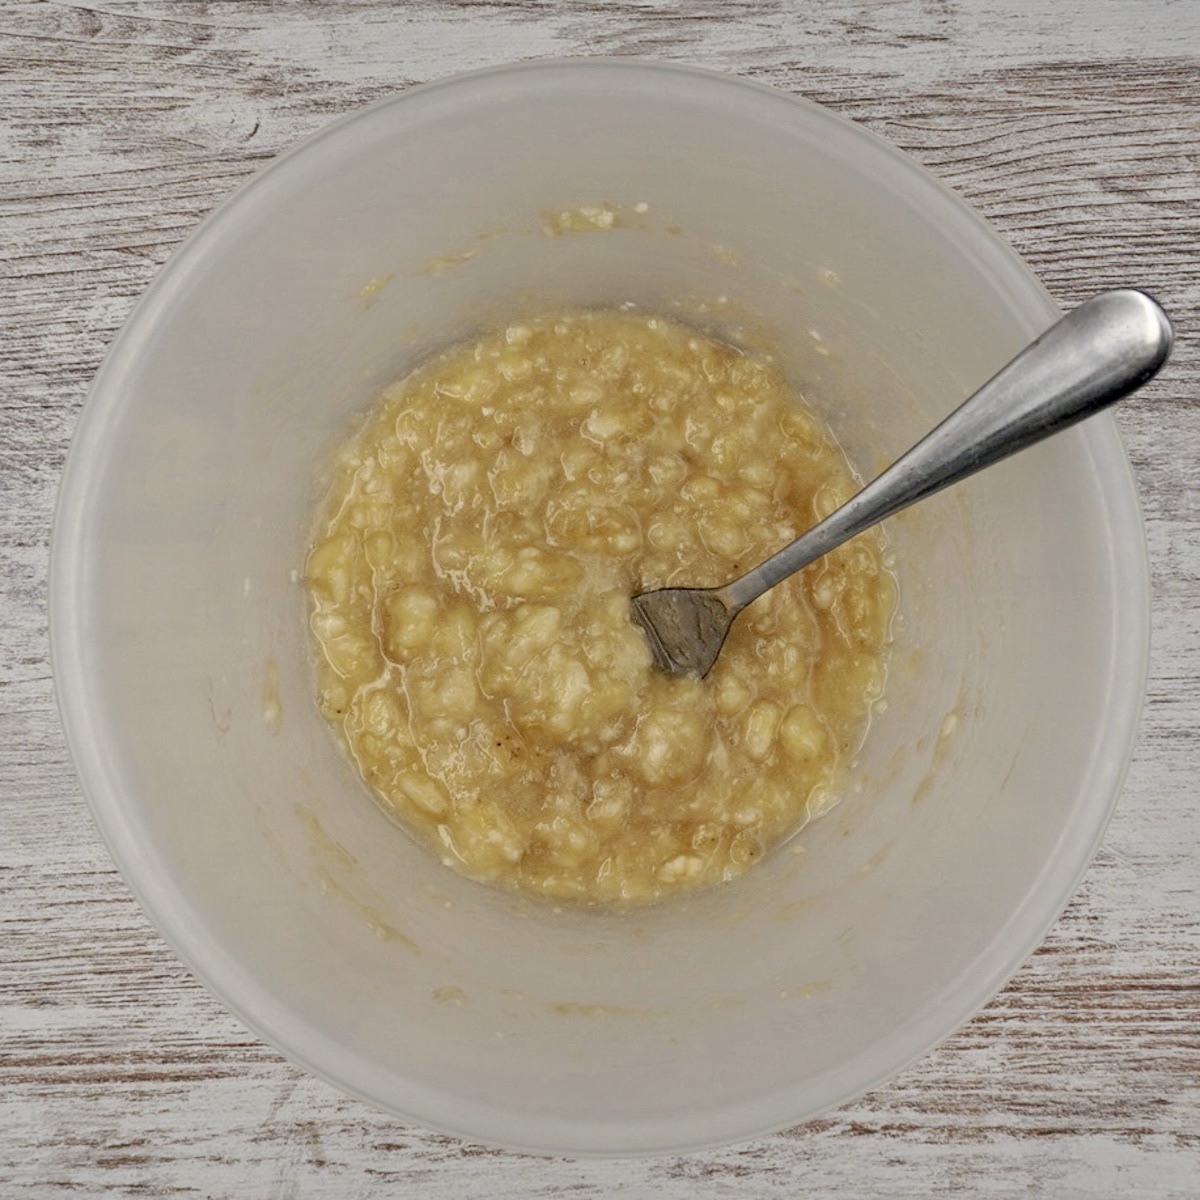 Mashed banana in a bowl with a fork.